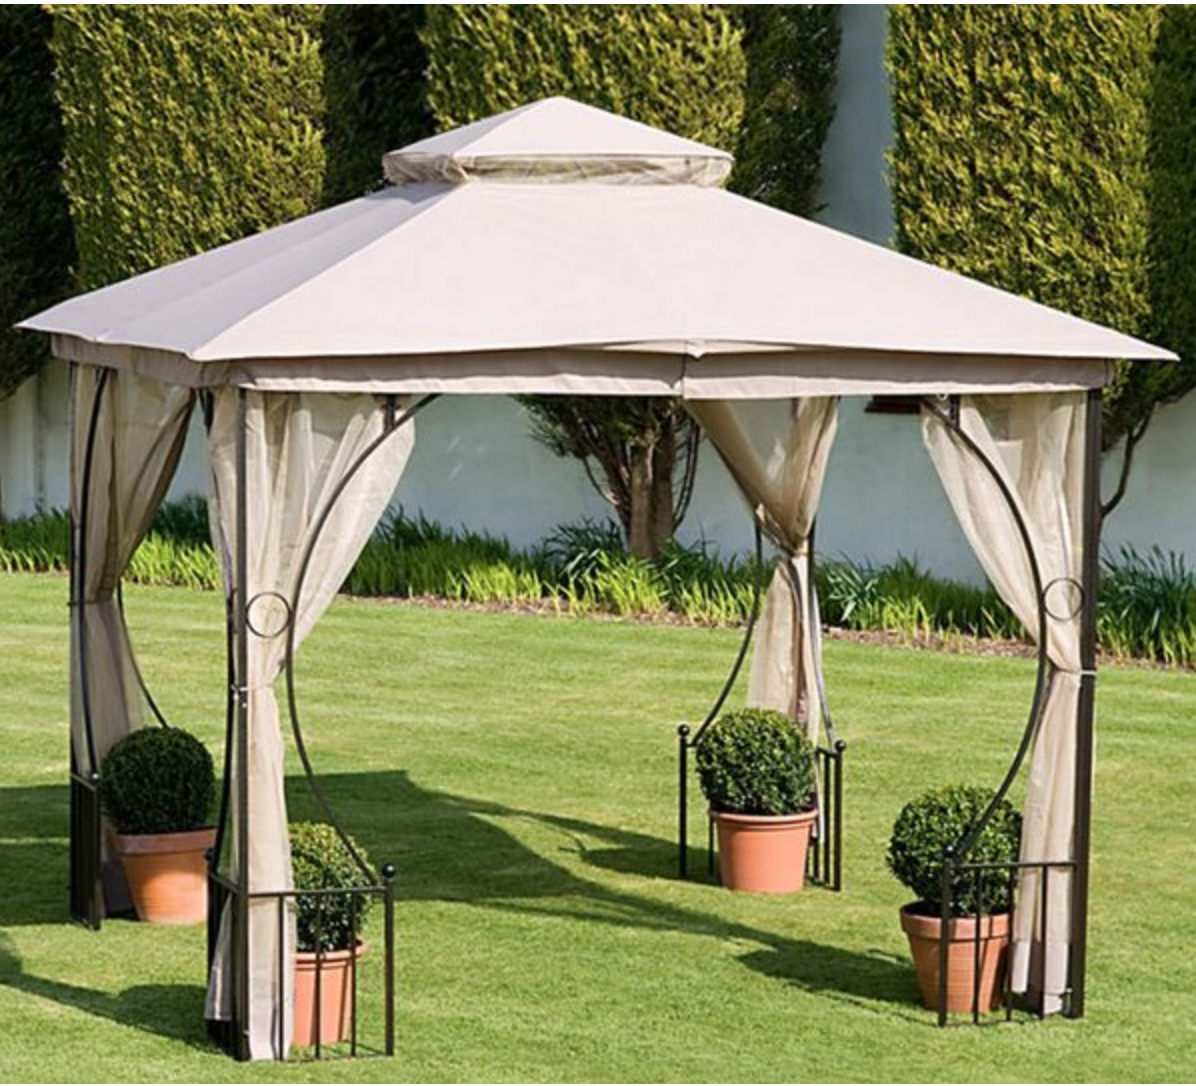 7 Gazebos From 40 To 12 000 For Your Outdoor Entertaining Joe Is The Voice Of Irish People At Home And Abroad